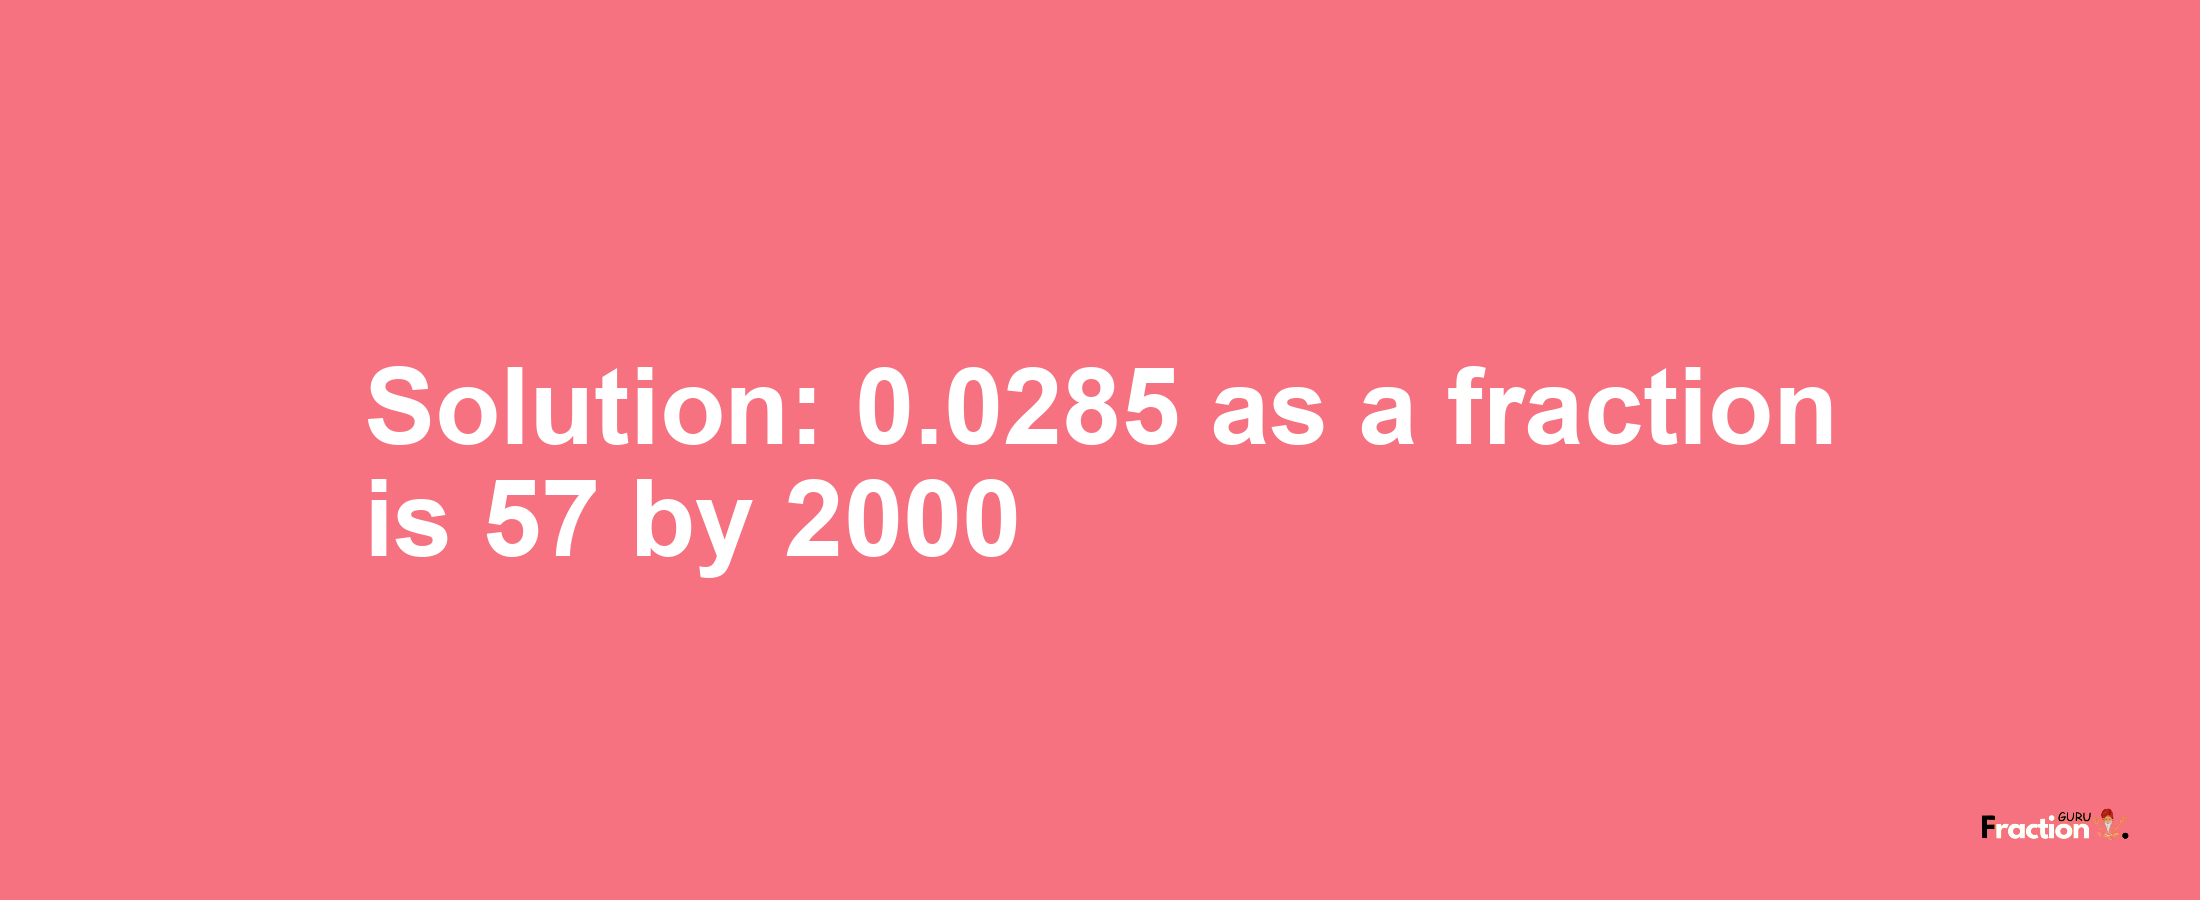 Solution:0.0285 as a fraction is 57/2000